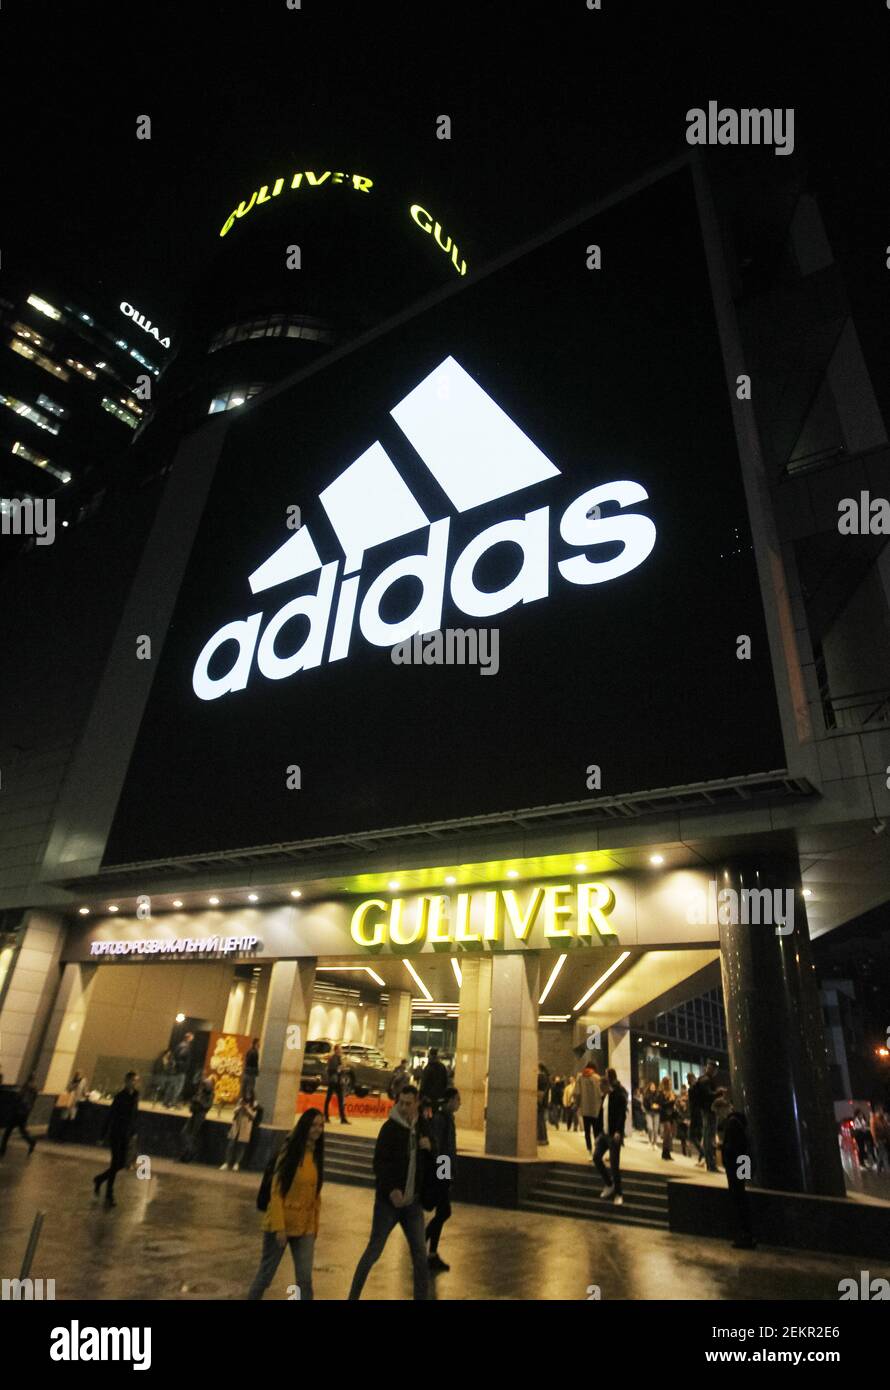 A huge screen shows the logo Adidas on a shopping mall building in downtown  Kiev Stock Photo - Alamy